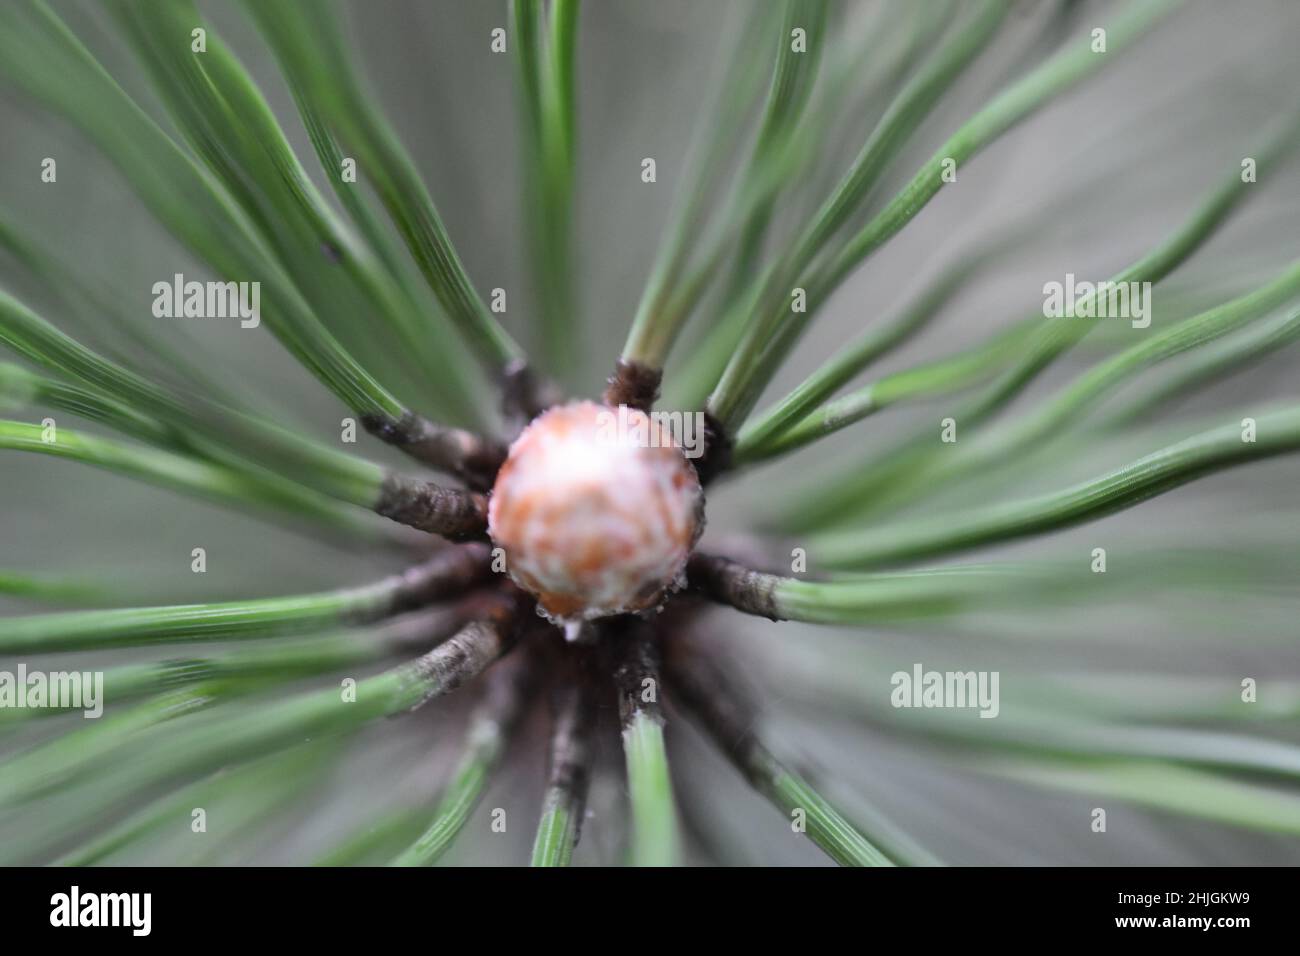 A closeup deatail of the Pinus thunbergii green plant Stock Photo